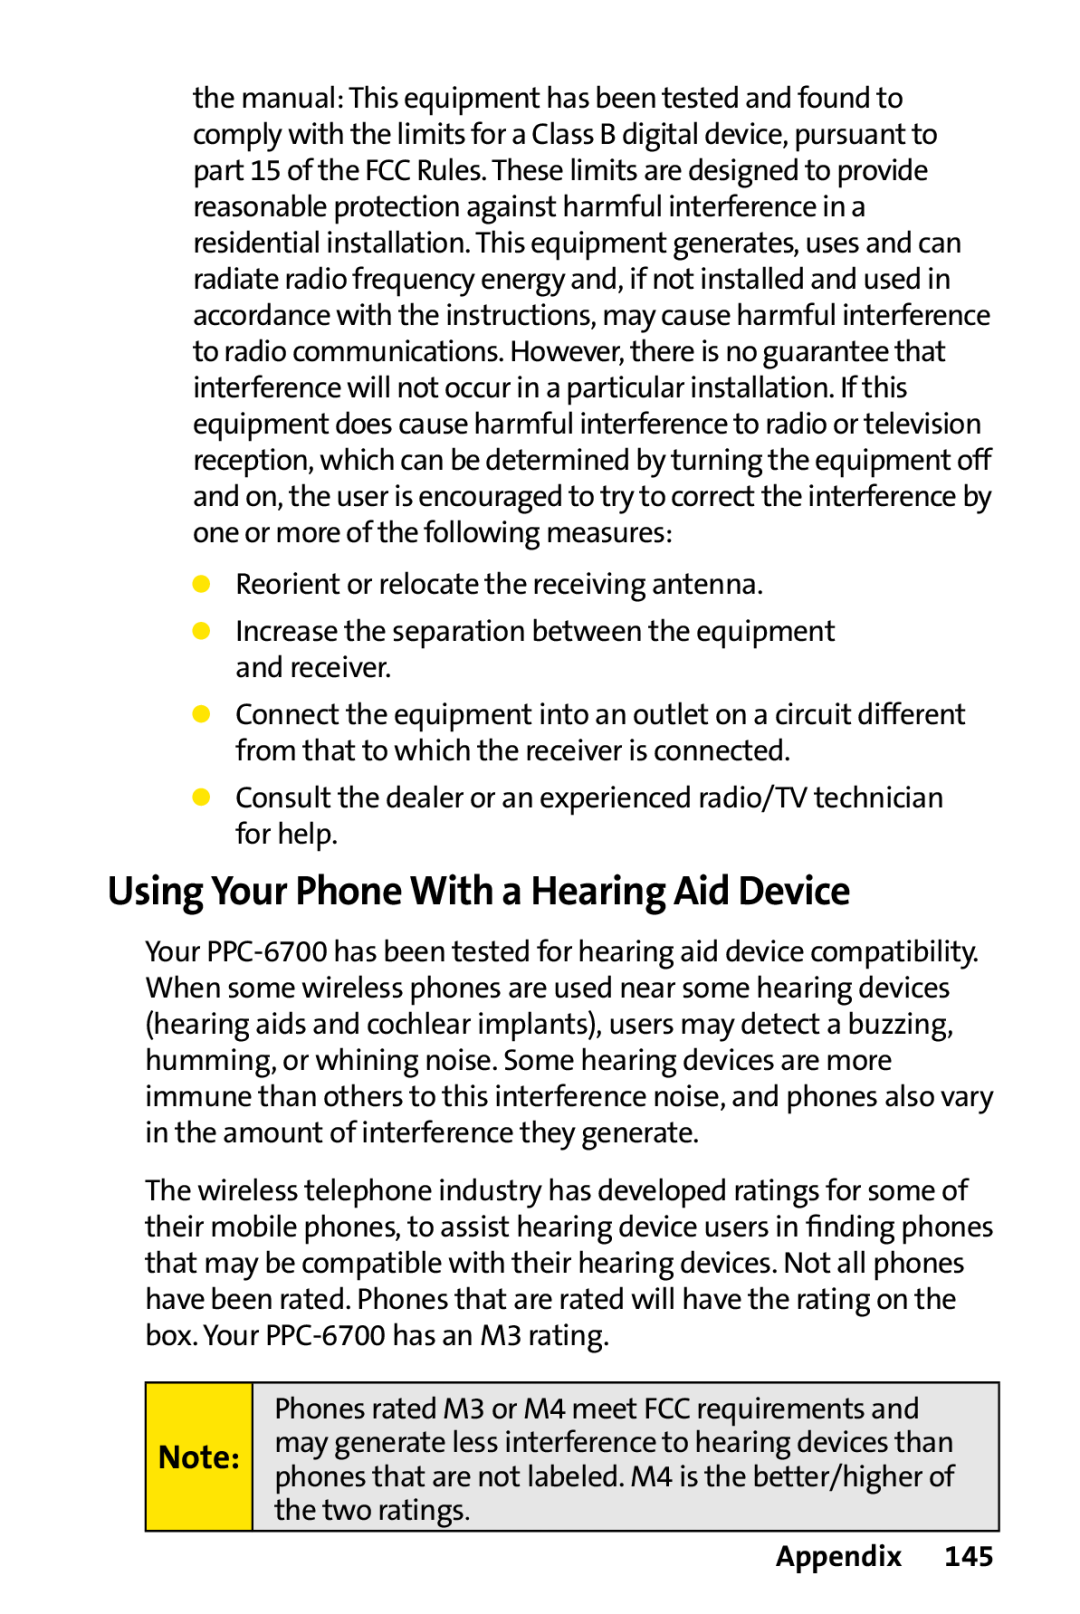 Sprint Nextel PPC-6700 manual Using Your Phone With a Hearing Aid Device, Appendix 